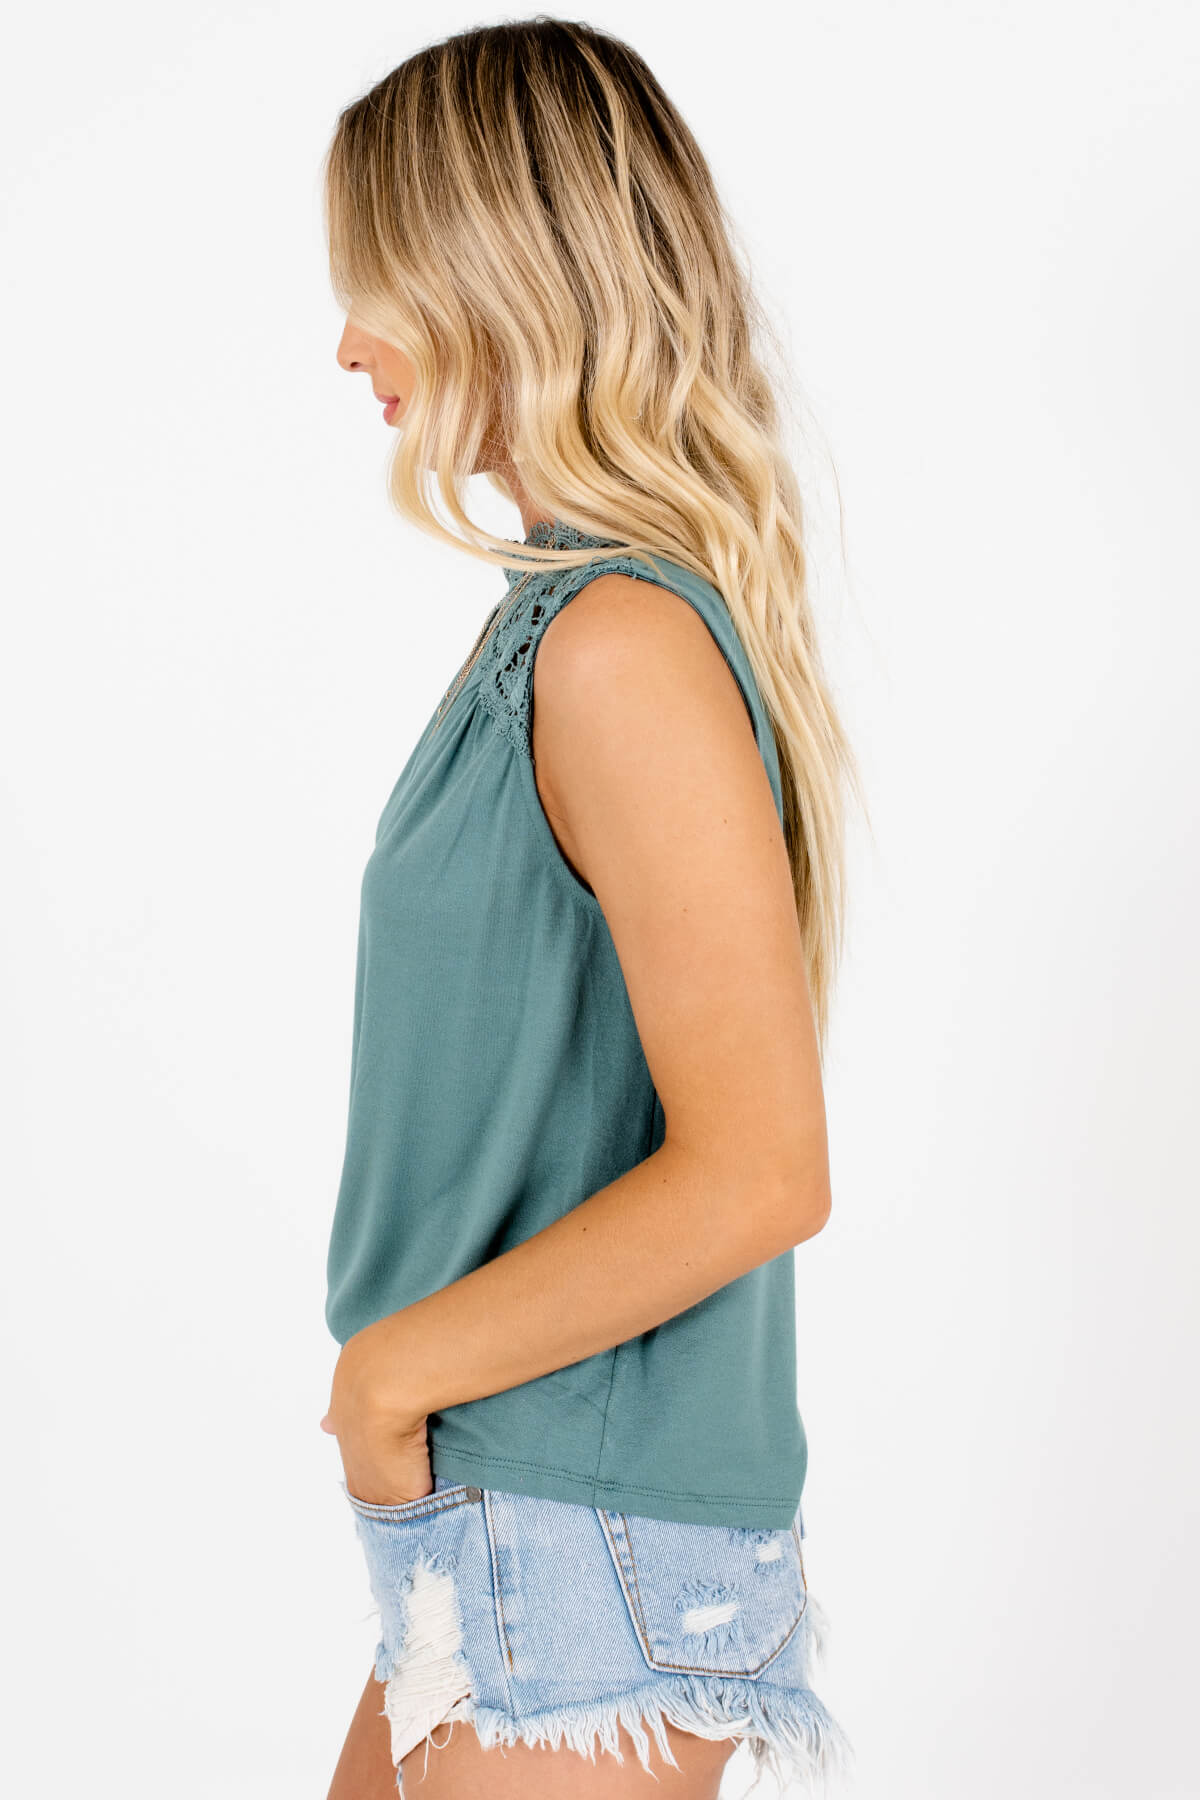 Teal Turquoise Green Lace Tank Tops Affordable Online Boutique